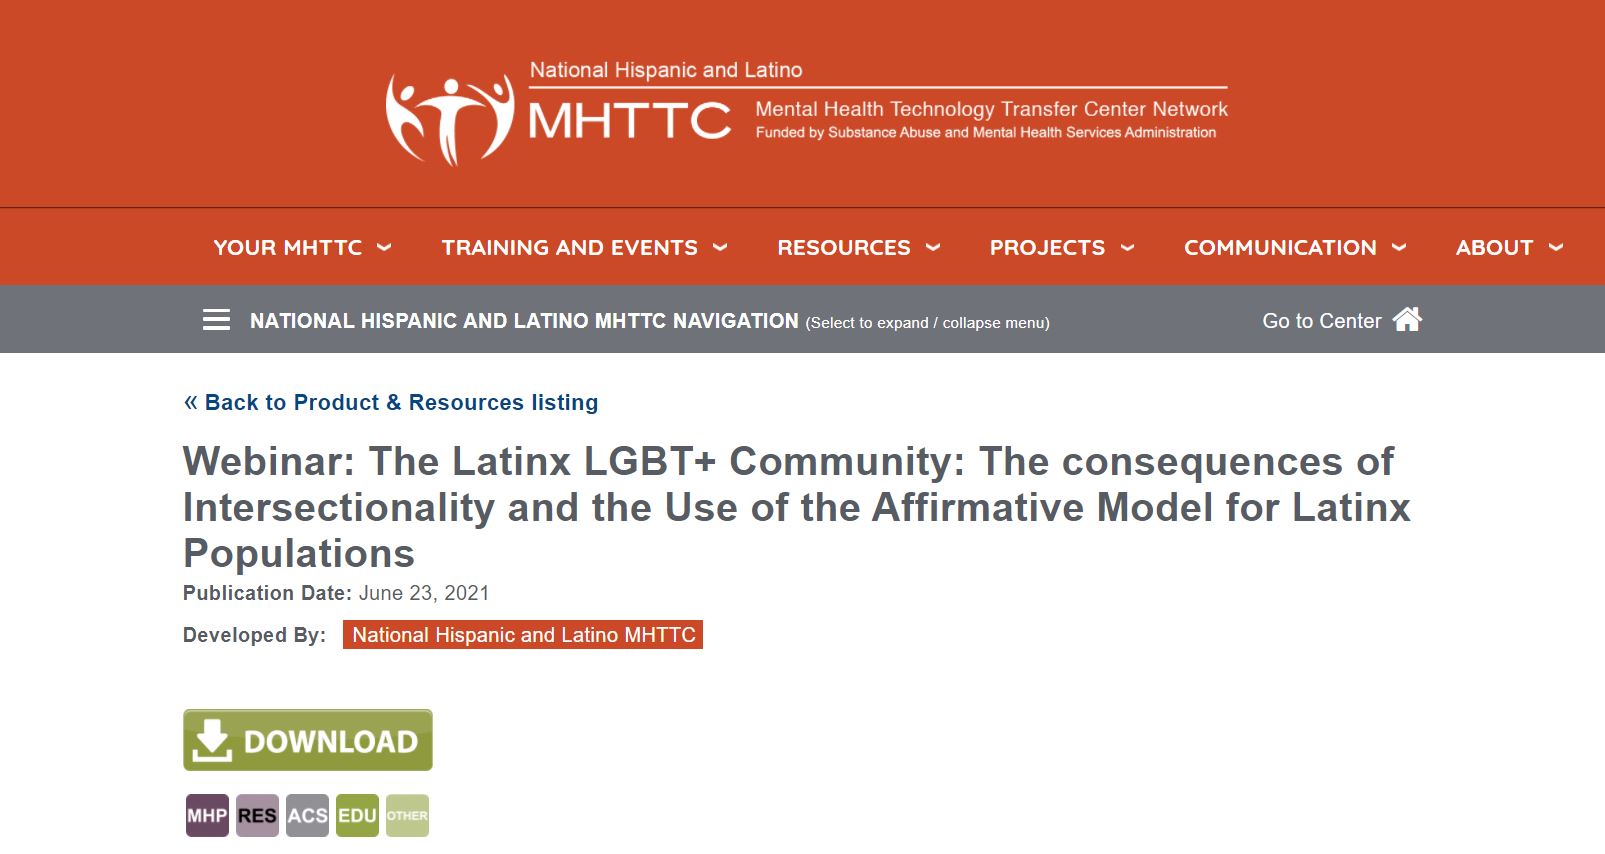 National Hispanic and Latino MHTTCWebinar: The Latinx LGBT+ Community: The consequences of Intersectionality and the Use of the Affirmative Model for Latinx Populations